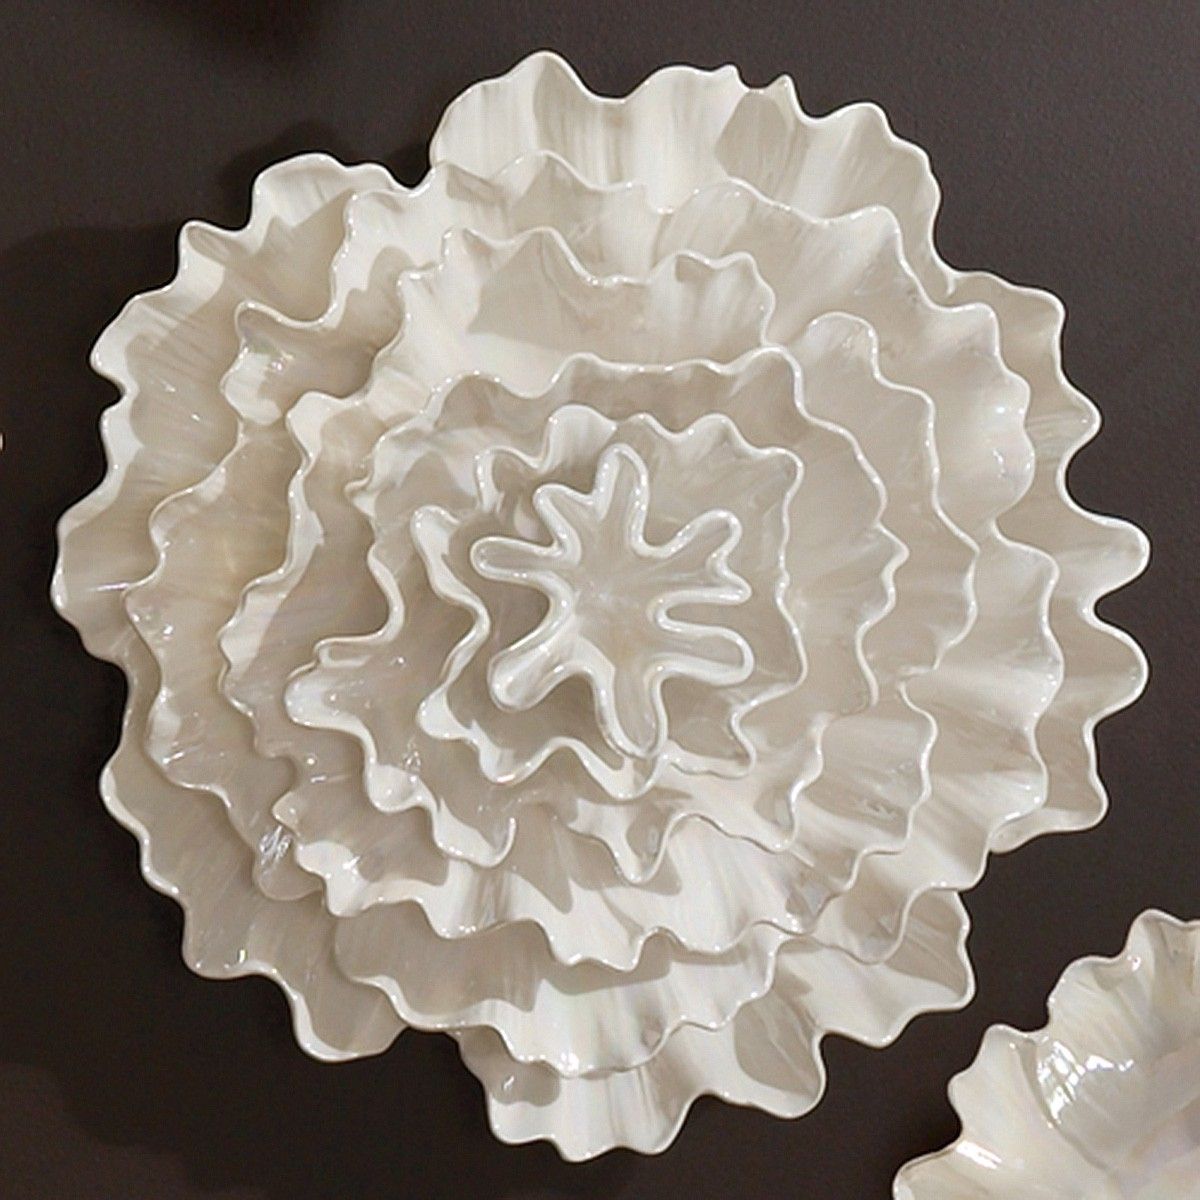 Well Liked Ceramic Flower Wall Art Intended For Adorable 30+ Ceramic Flower Wall Decor Decorating Design Of (View 9 of 15)